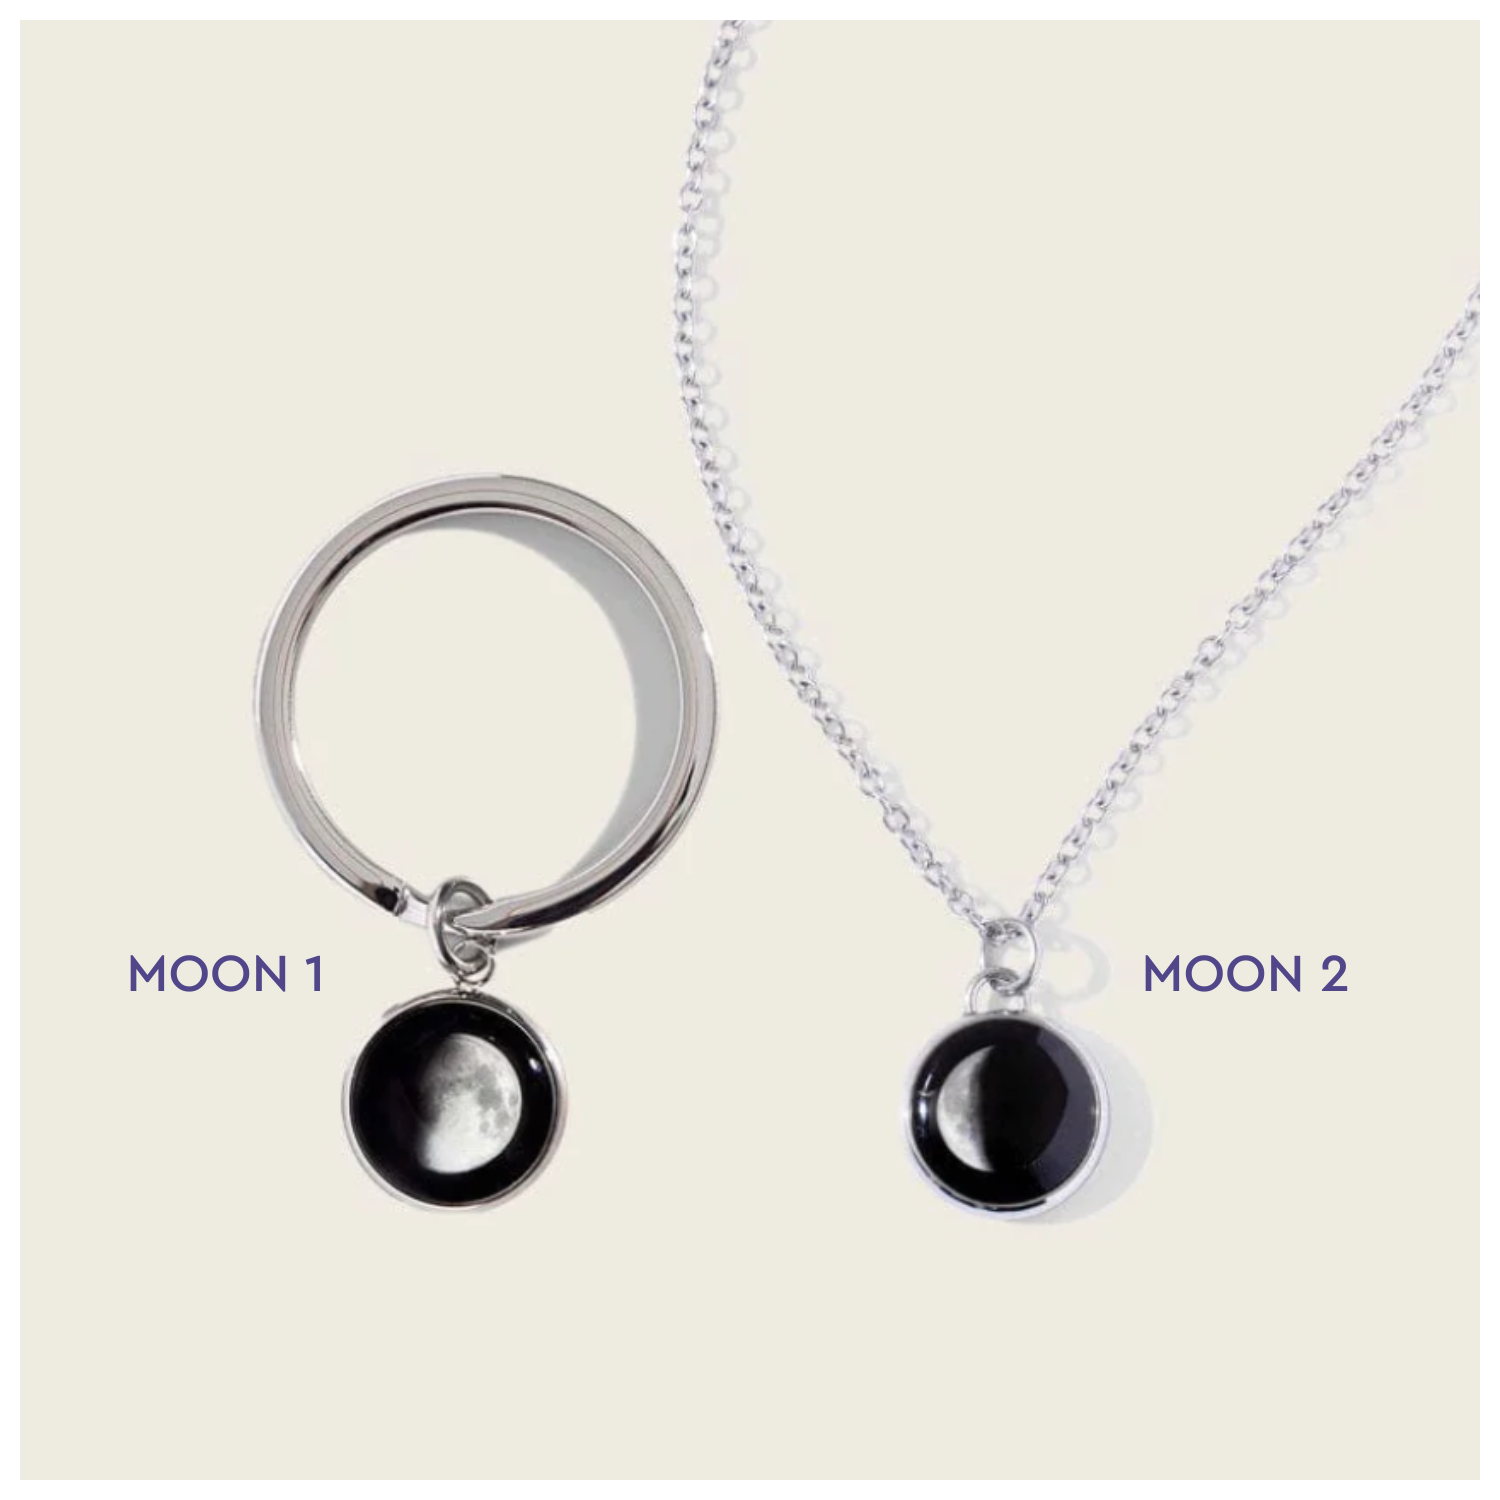 Moon Memory Key Ring and Men's Charmed Simplicity Necklace Bundle